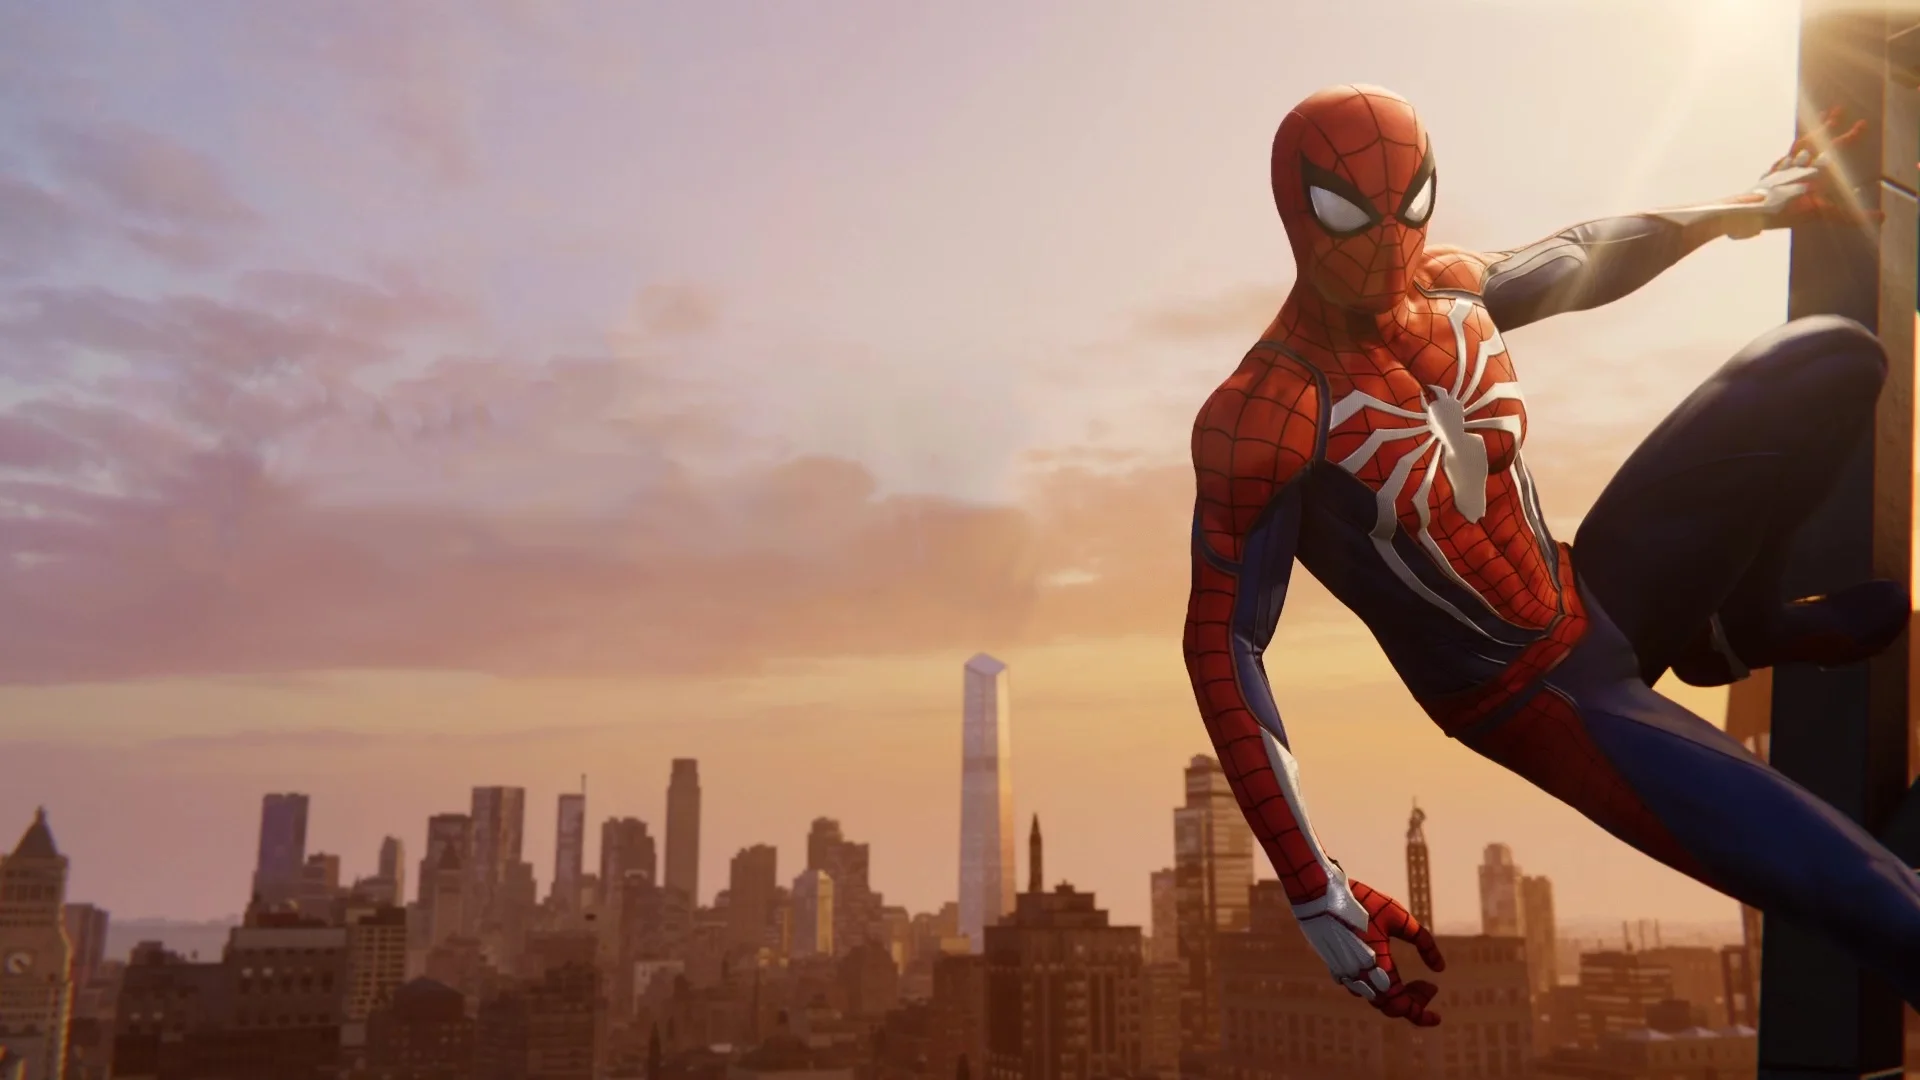 Marvel's Spider-Man 2 will have twice the open world of the first game